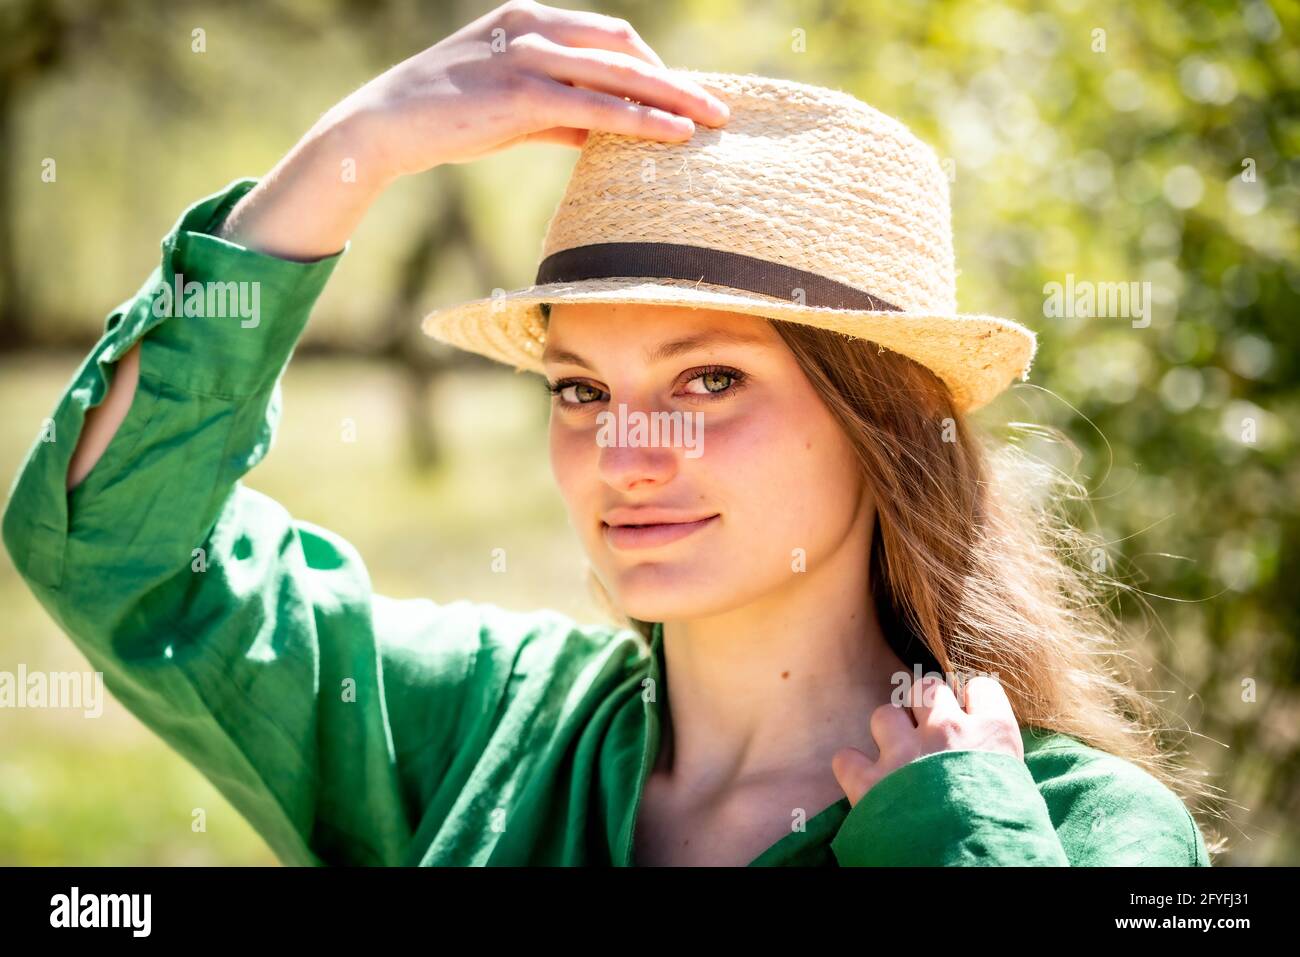 Portrait of a woman in summer. Stock Photo